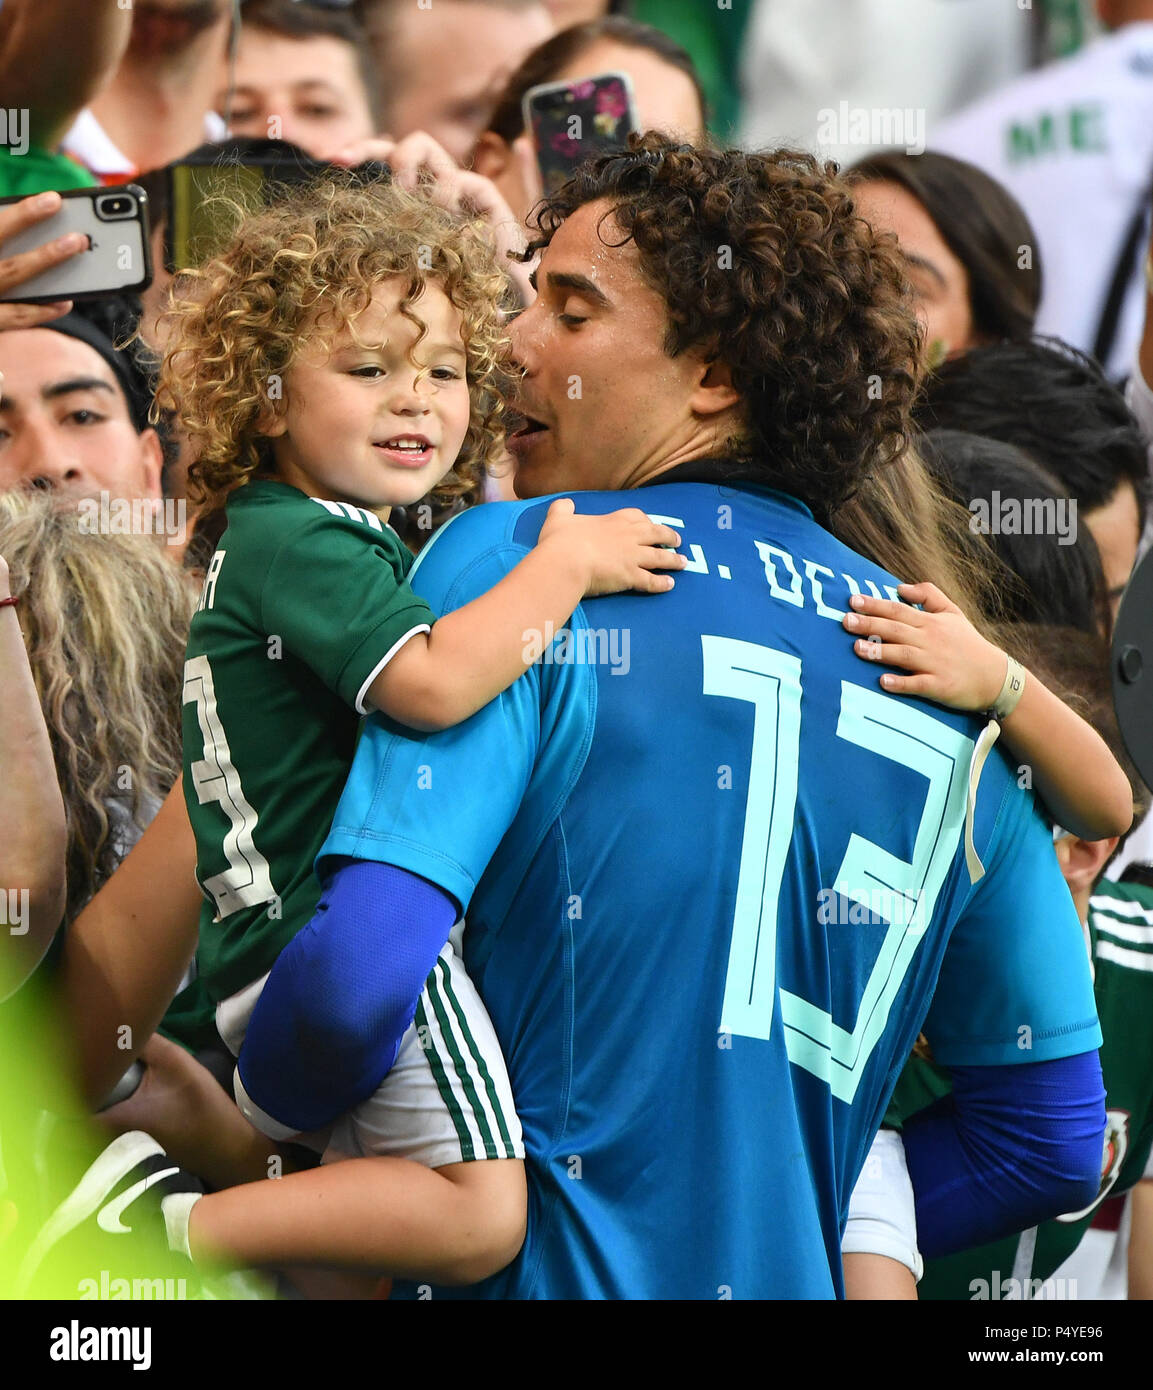 Rostov On Don. 23rd June, 2018. Mexico's goalkeeper Guillermo Ochoa celebrates with his family after the 2018 FIFA World Cup Group F match between South Korea and Mexico in Rostov-on-Don, Russia, June 23, 2018. Mexico won 2-1. Credit: Li Ga/Xinhua/Alamy Live News Stock Photo